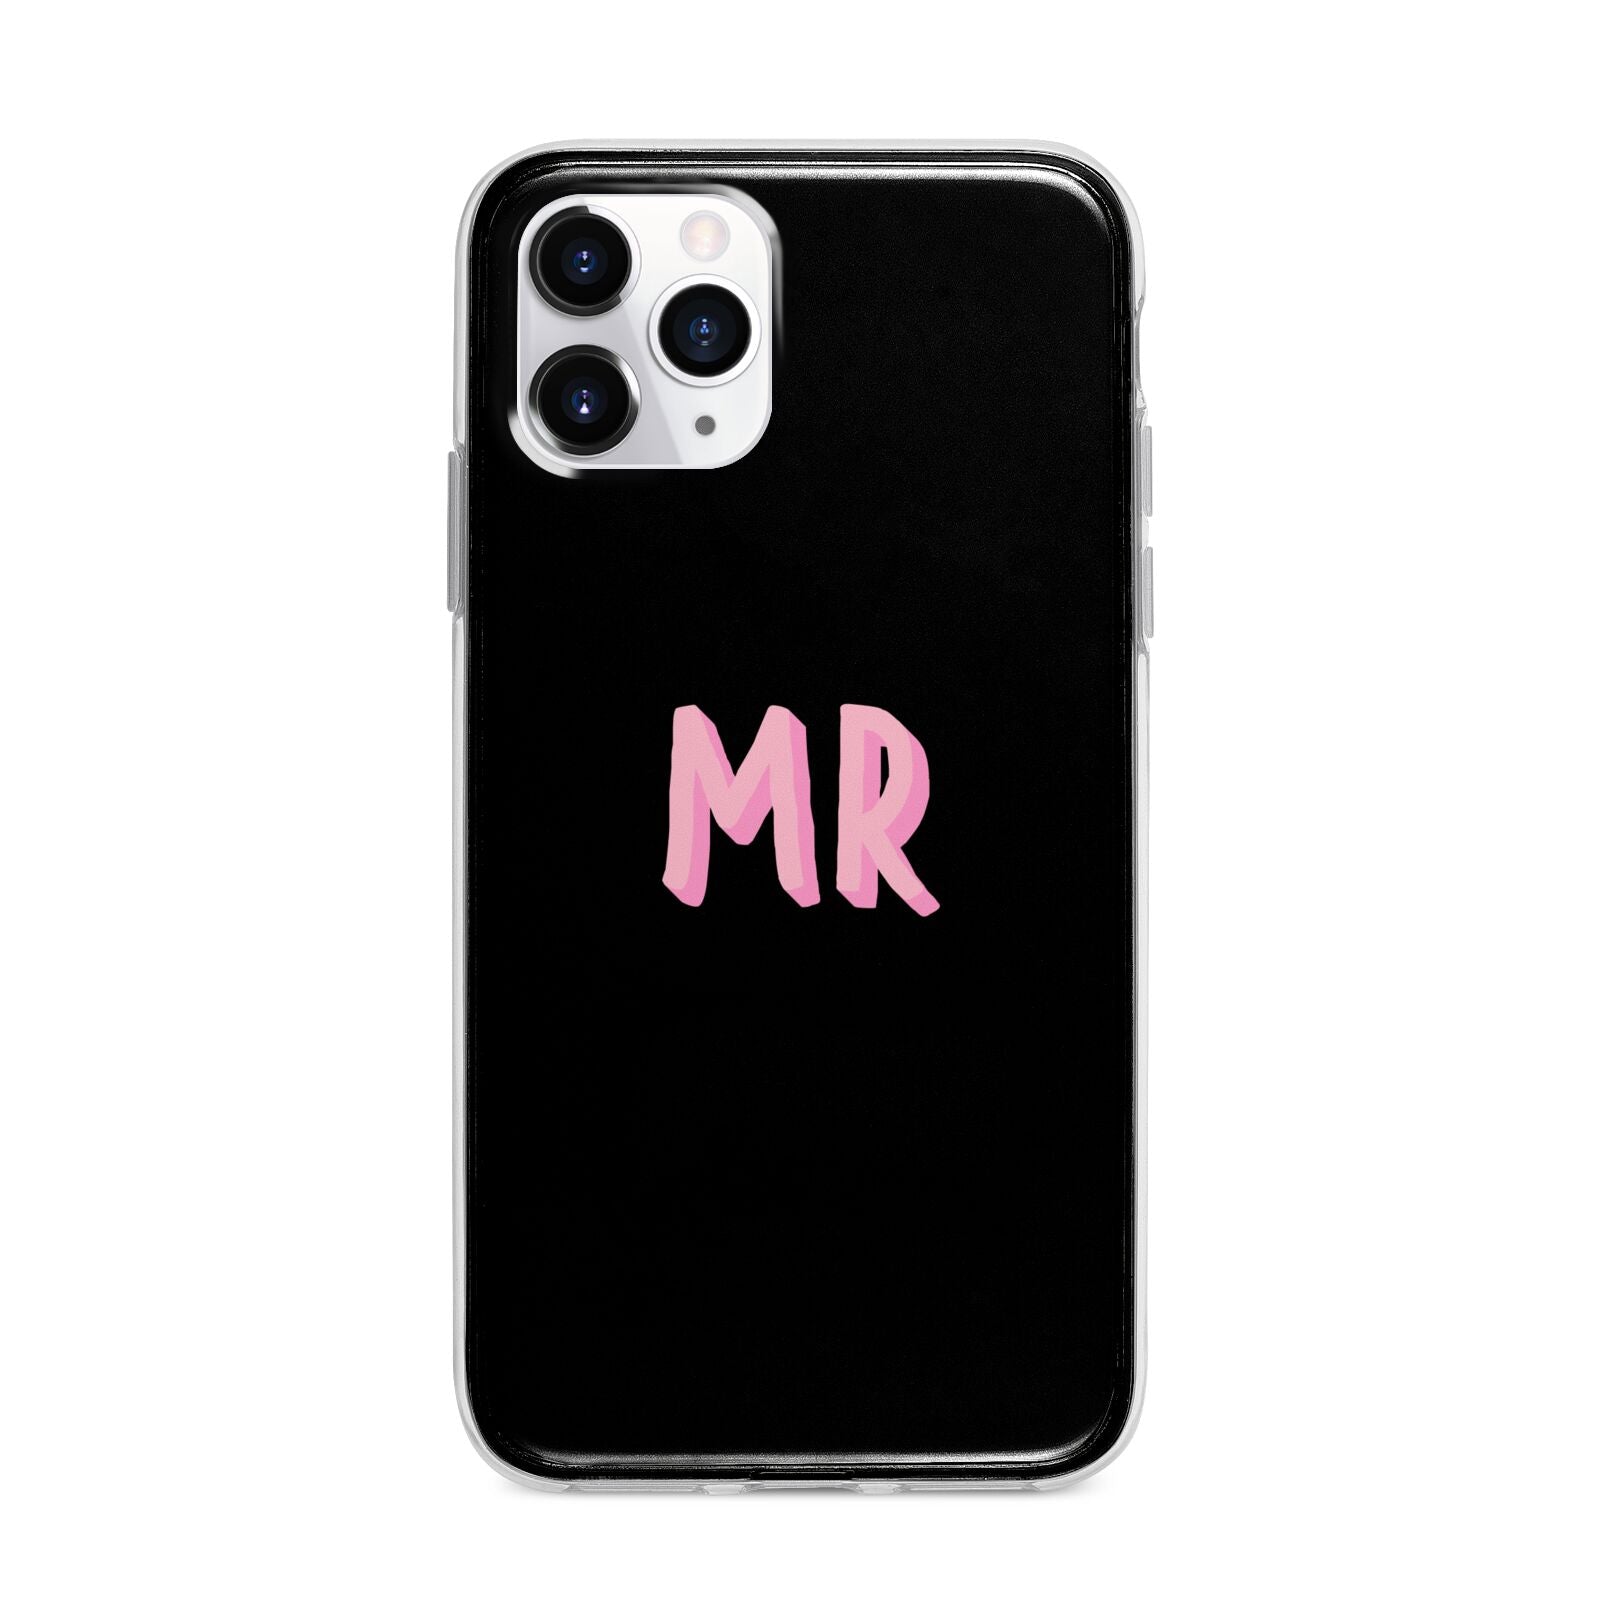 Mr Apple iPhone 11 Pro Max in Silver with Bumper Case